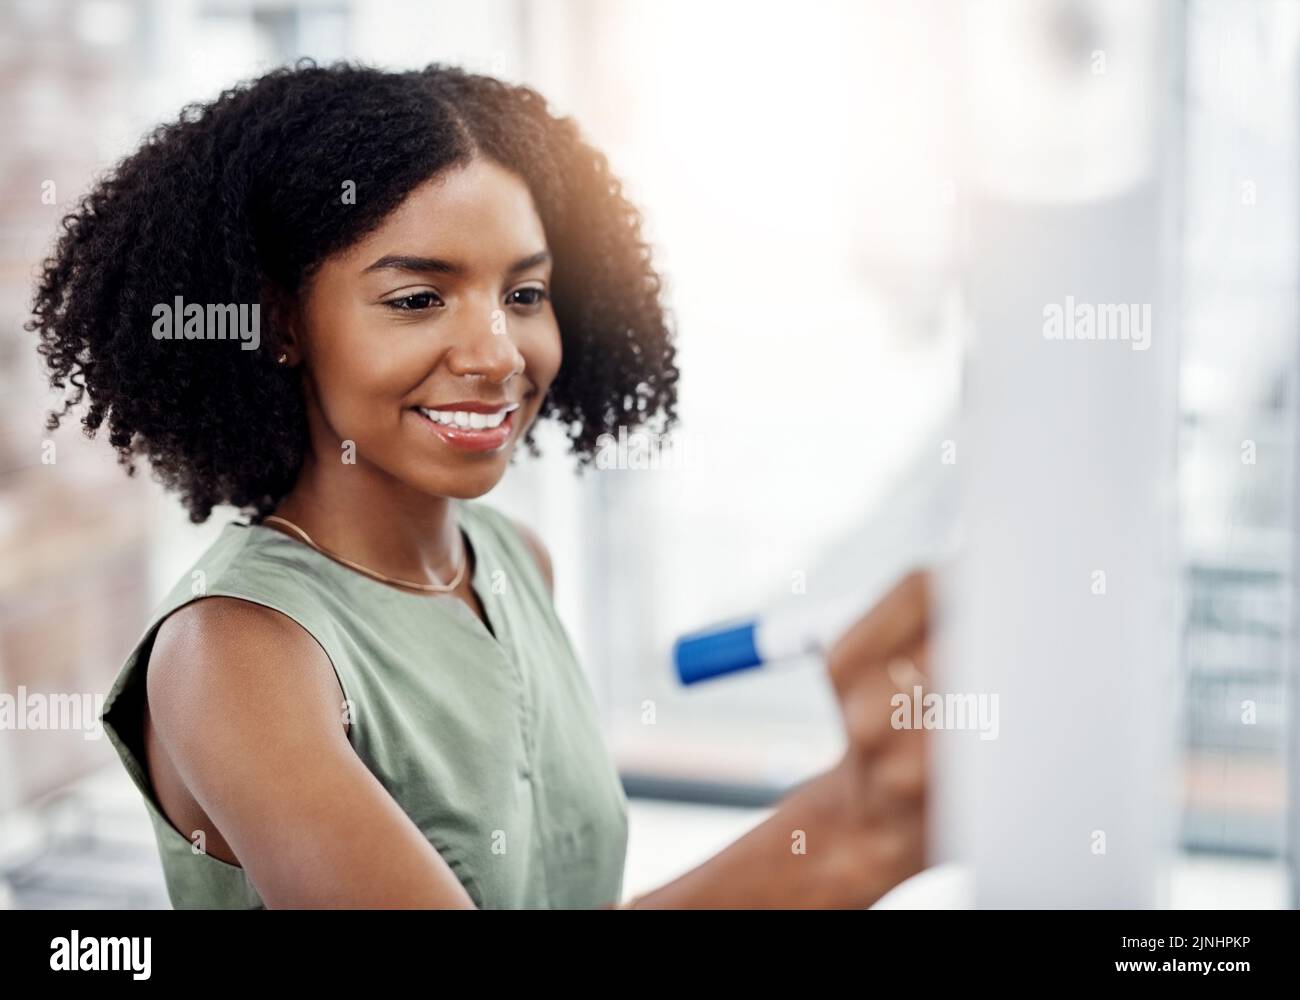 Planning is half the job done. an attractive young businesswoman working on a glass wipe board in her office. Stock Photo